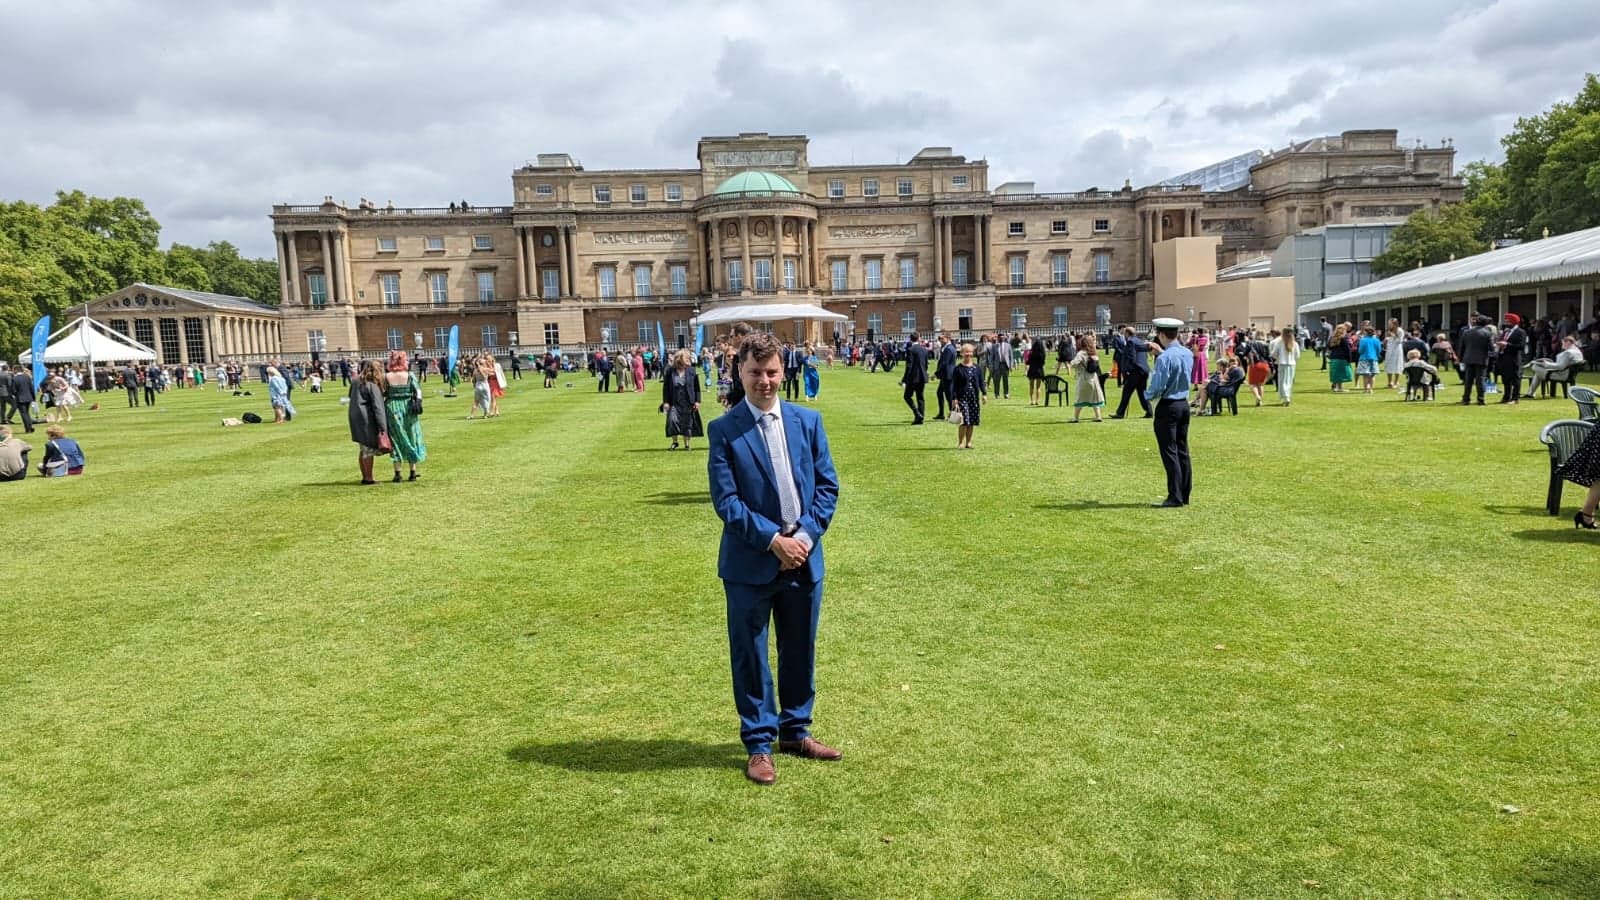 I went to Buckingham Palace Gardens – this is what it was like